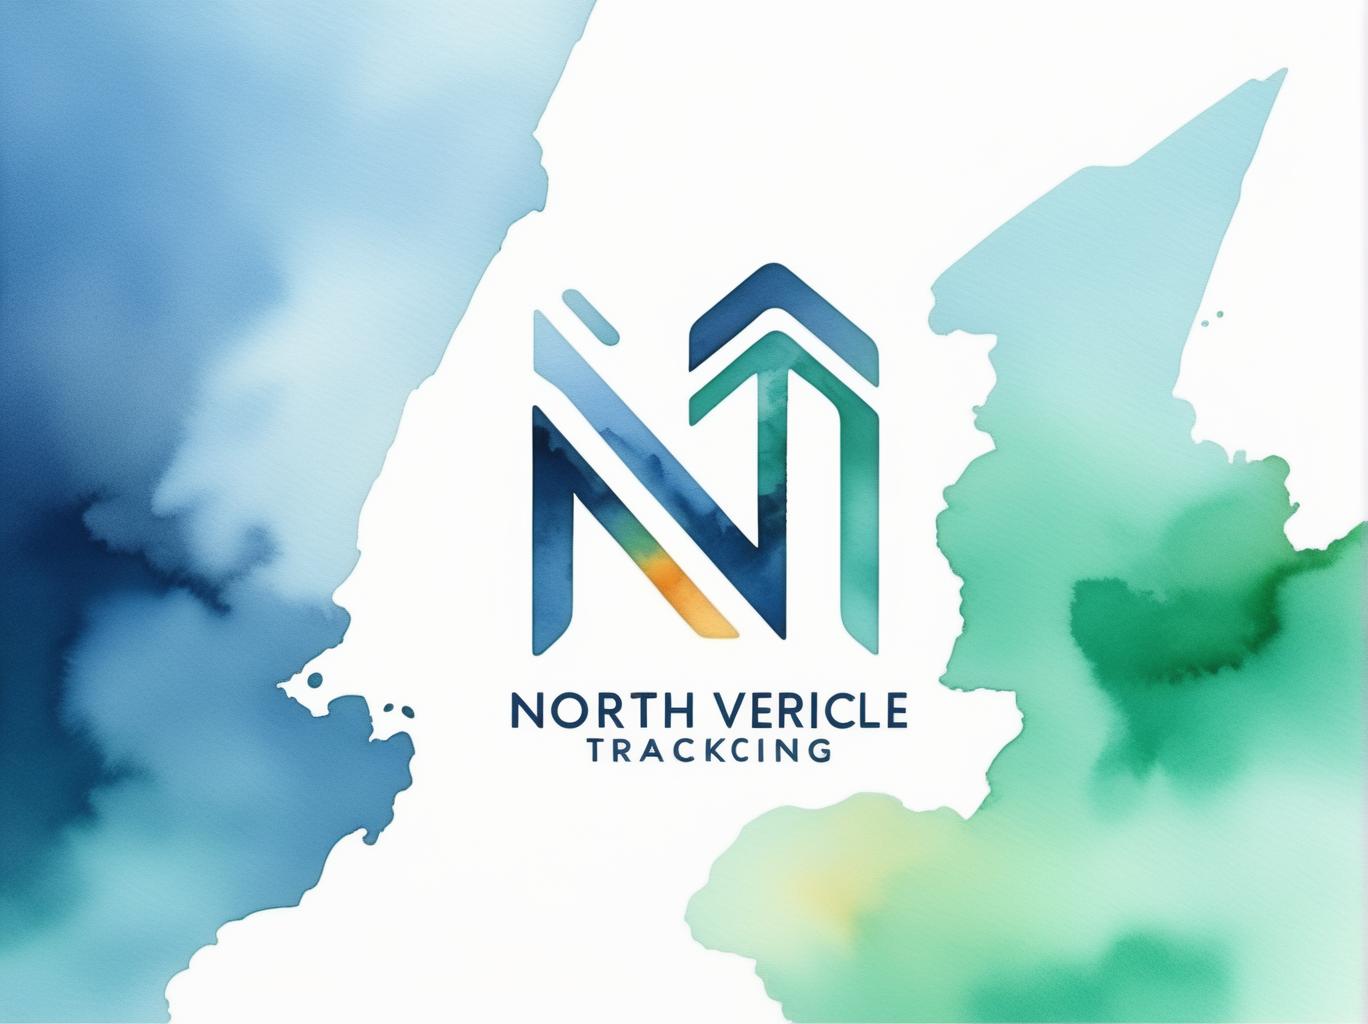  Logo, (watercolor style), create a logo with N for north vehicle tracking